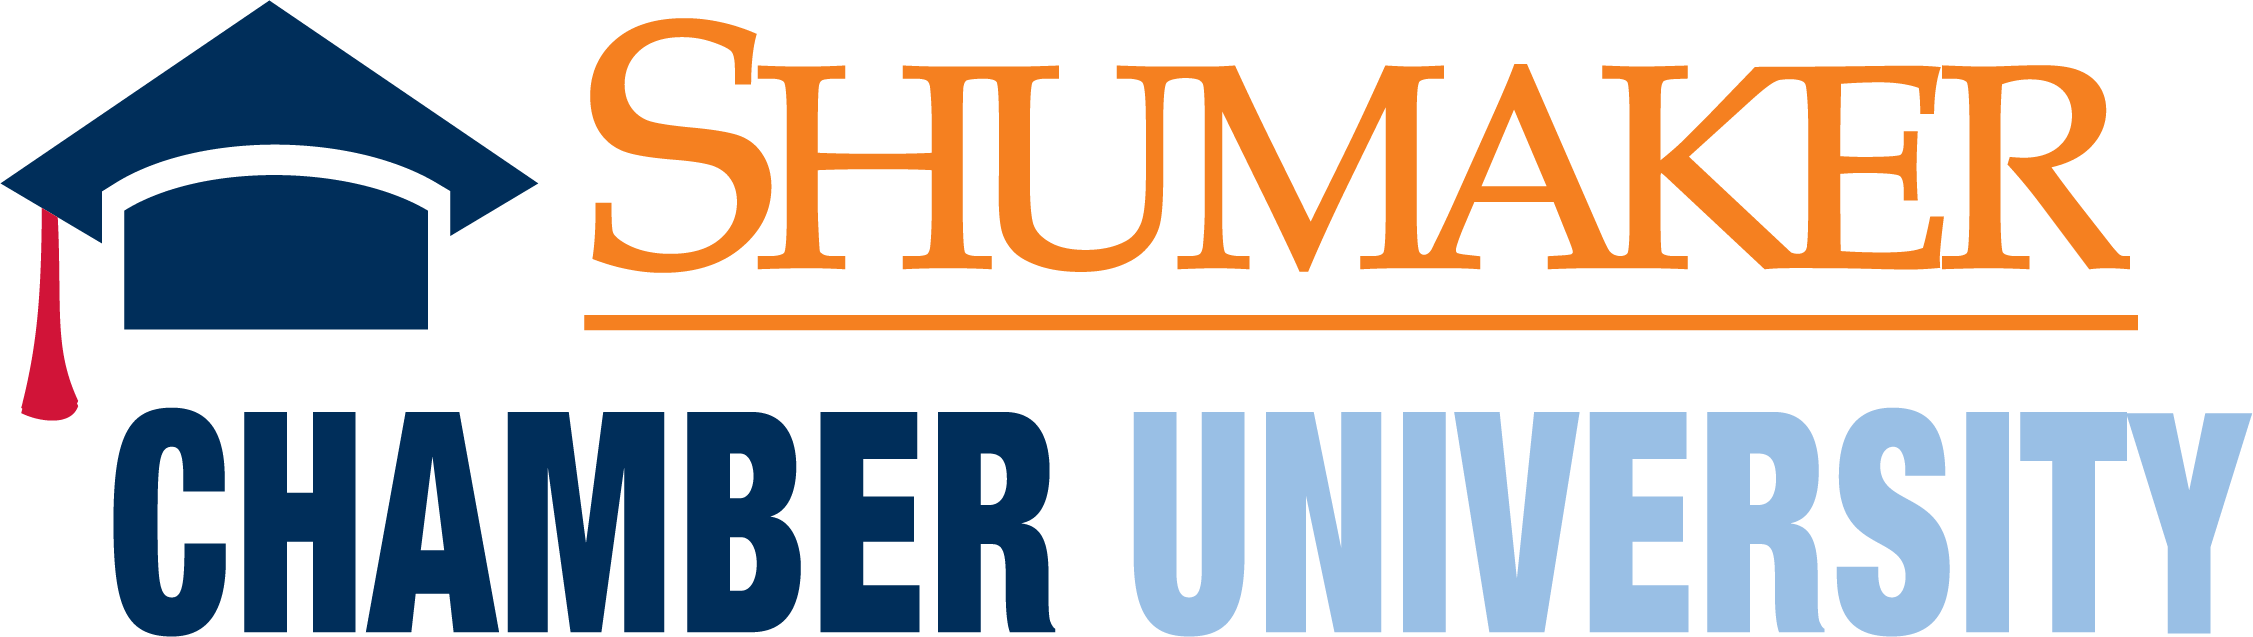 Shumaker Chamber University: Mental Health in the Workplace: The 4 Pillars of Creating a Mentally Healthy Workplace